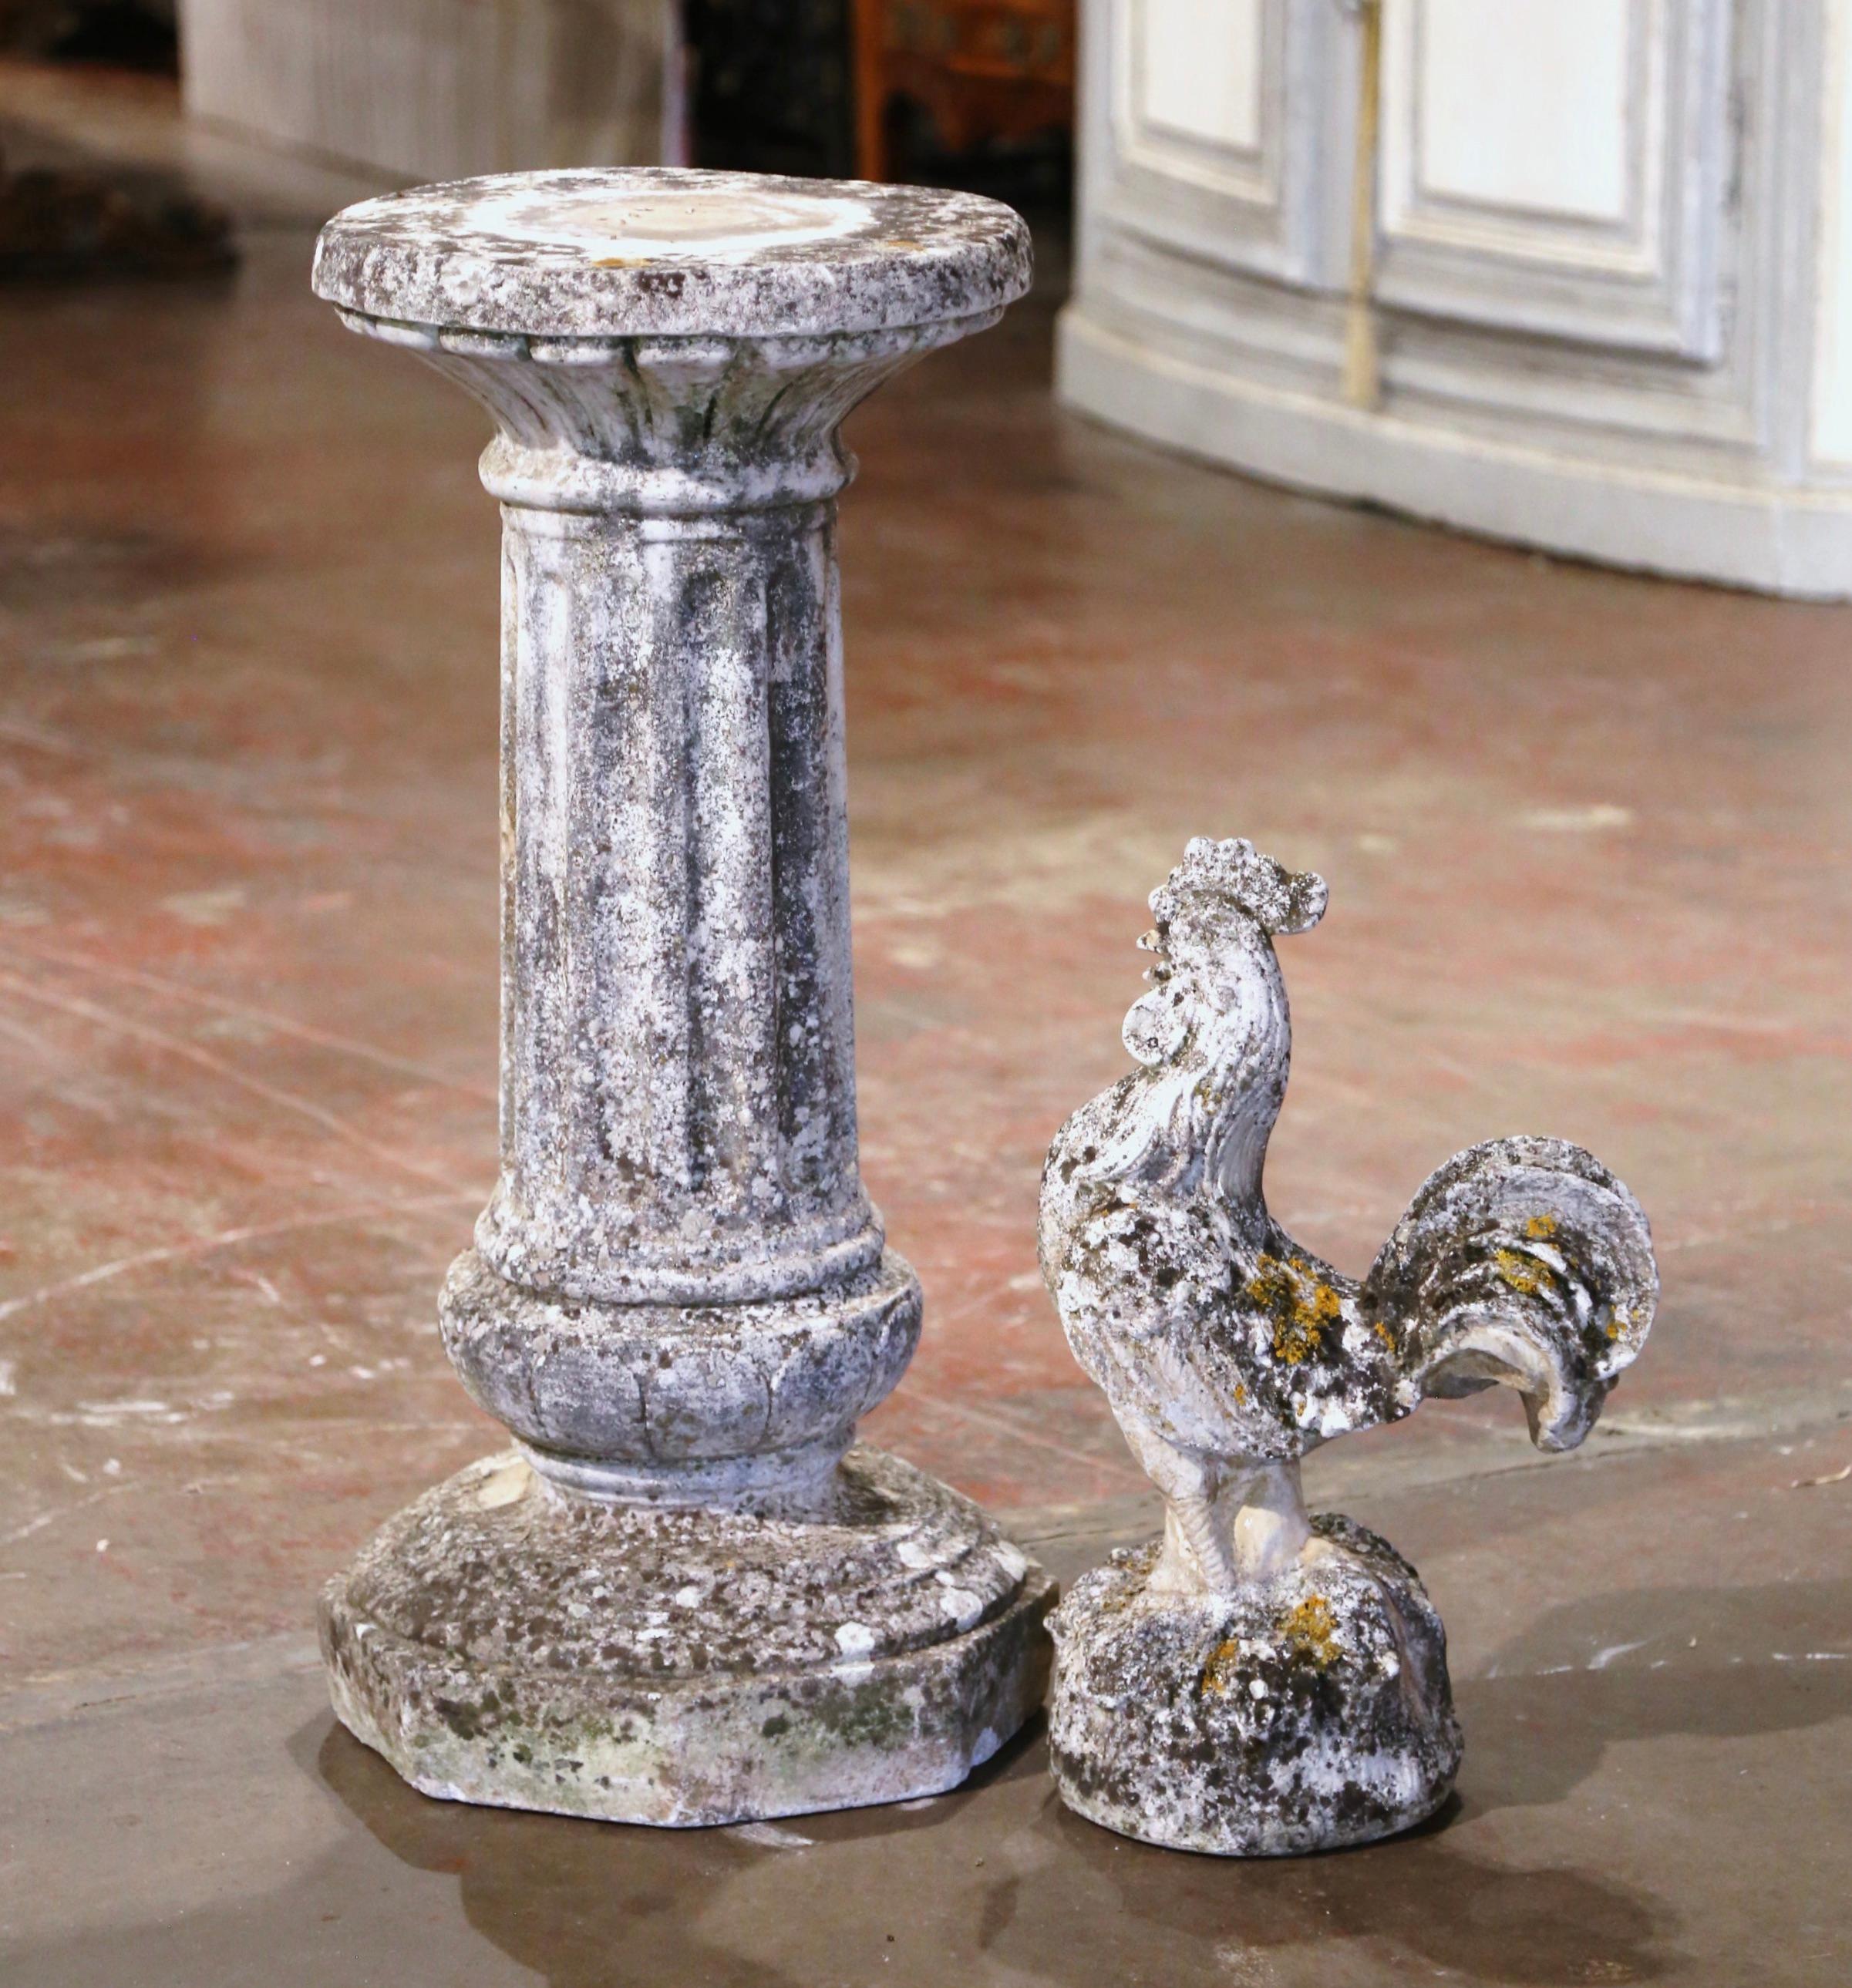 Early 20th Century Carved Stone Pedestal and Rooster Sculpture Garden Statuary For Sale 1